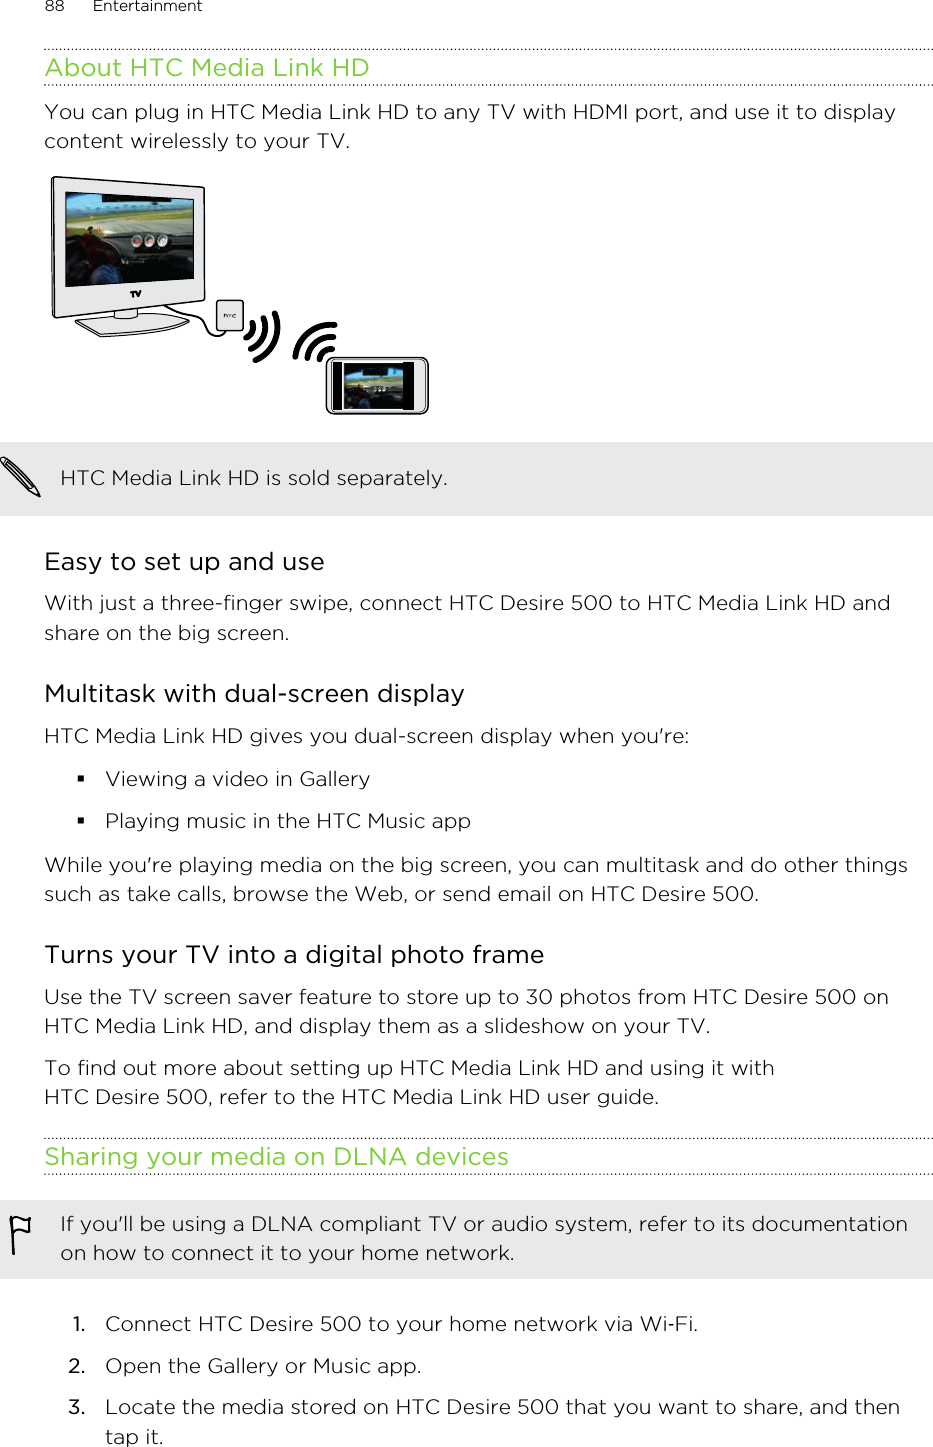 About HTC Media Link HDYou can plug in HTC Media Link HD to any TV with HDMI port, and use it to displaycontent wirelessly to your TV.HTC Media Link HD is sold separately.Easy to set up and useWith just a three-finger swipe, connect HTC Desire 500 to HTC Media Link HD andshare on the big screen.Multitask with dual-screen displayHTC Media Link HD gives you dual-screen display when you&apos;re:§Viewing a video in Gallery§Playing music in the HTC Music appWhile you&apos;re playing media on the big screen, you can multitask and do other thingssuch as take calls, browse the Web, or send email on HTC Desire 500.Turns your TV into a digital photo frameUse the TV screen saver feature to store up to 30 photos from HTC Desire 500 onHTC Media Link HD, and display them as a slideshow on your TV.To find out more about setting up HTC Media Link HD and using it withHTC Desire 500, refer to the HTC Media Link HD user guide.Sharing your media on DLNA devicesIf you&apos;ll be using a DLNA compliant TV or audio system, refer to its documentationon how to connect it to your home network.1. Connect HTC Desire 500 to your home network via Wi‑Fi.2. Open the Gallery or Music app.3. Locate the media stored on HTC Desire 500 that you want to share, and thentap it.88 Entertainment